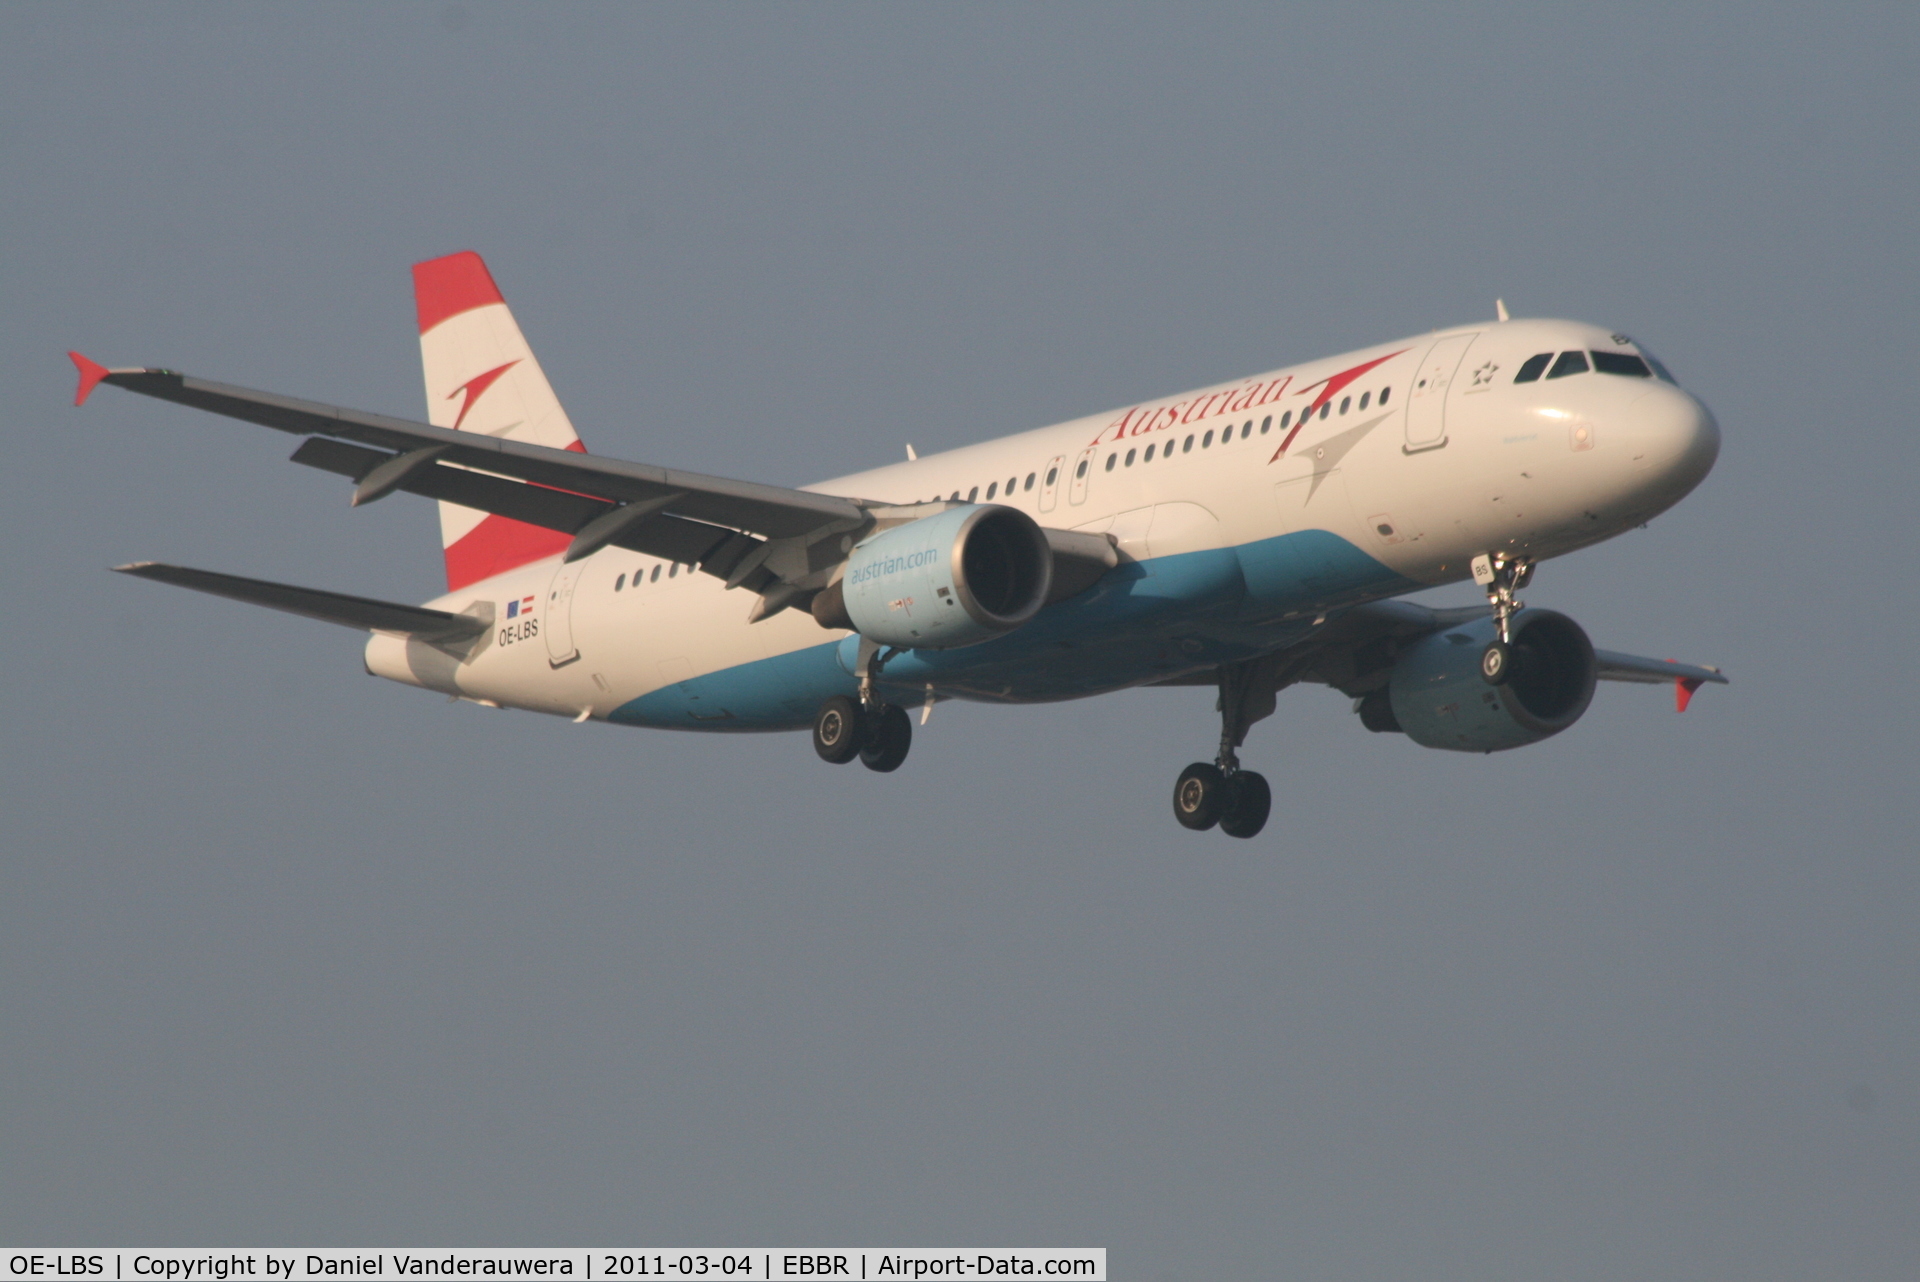 OE-LBS, 2000 Airbus A320-214 C/N 1189, Arrival of flight OS351 to RWY 02